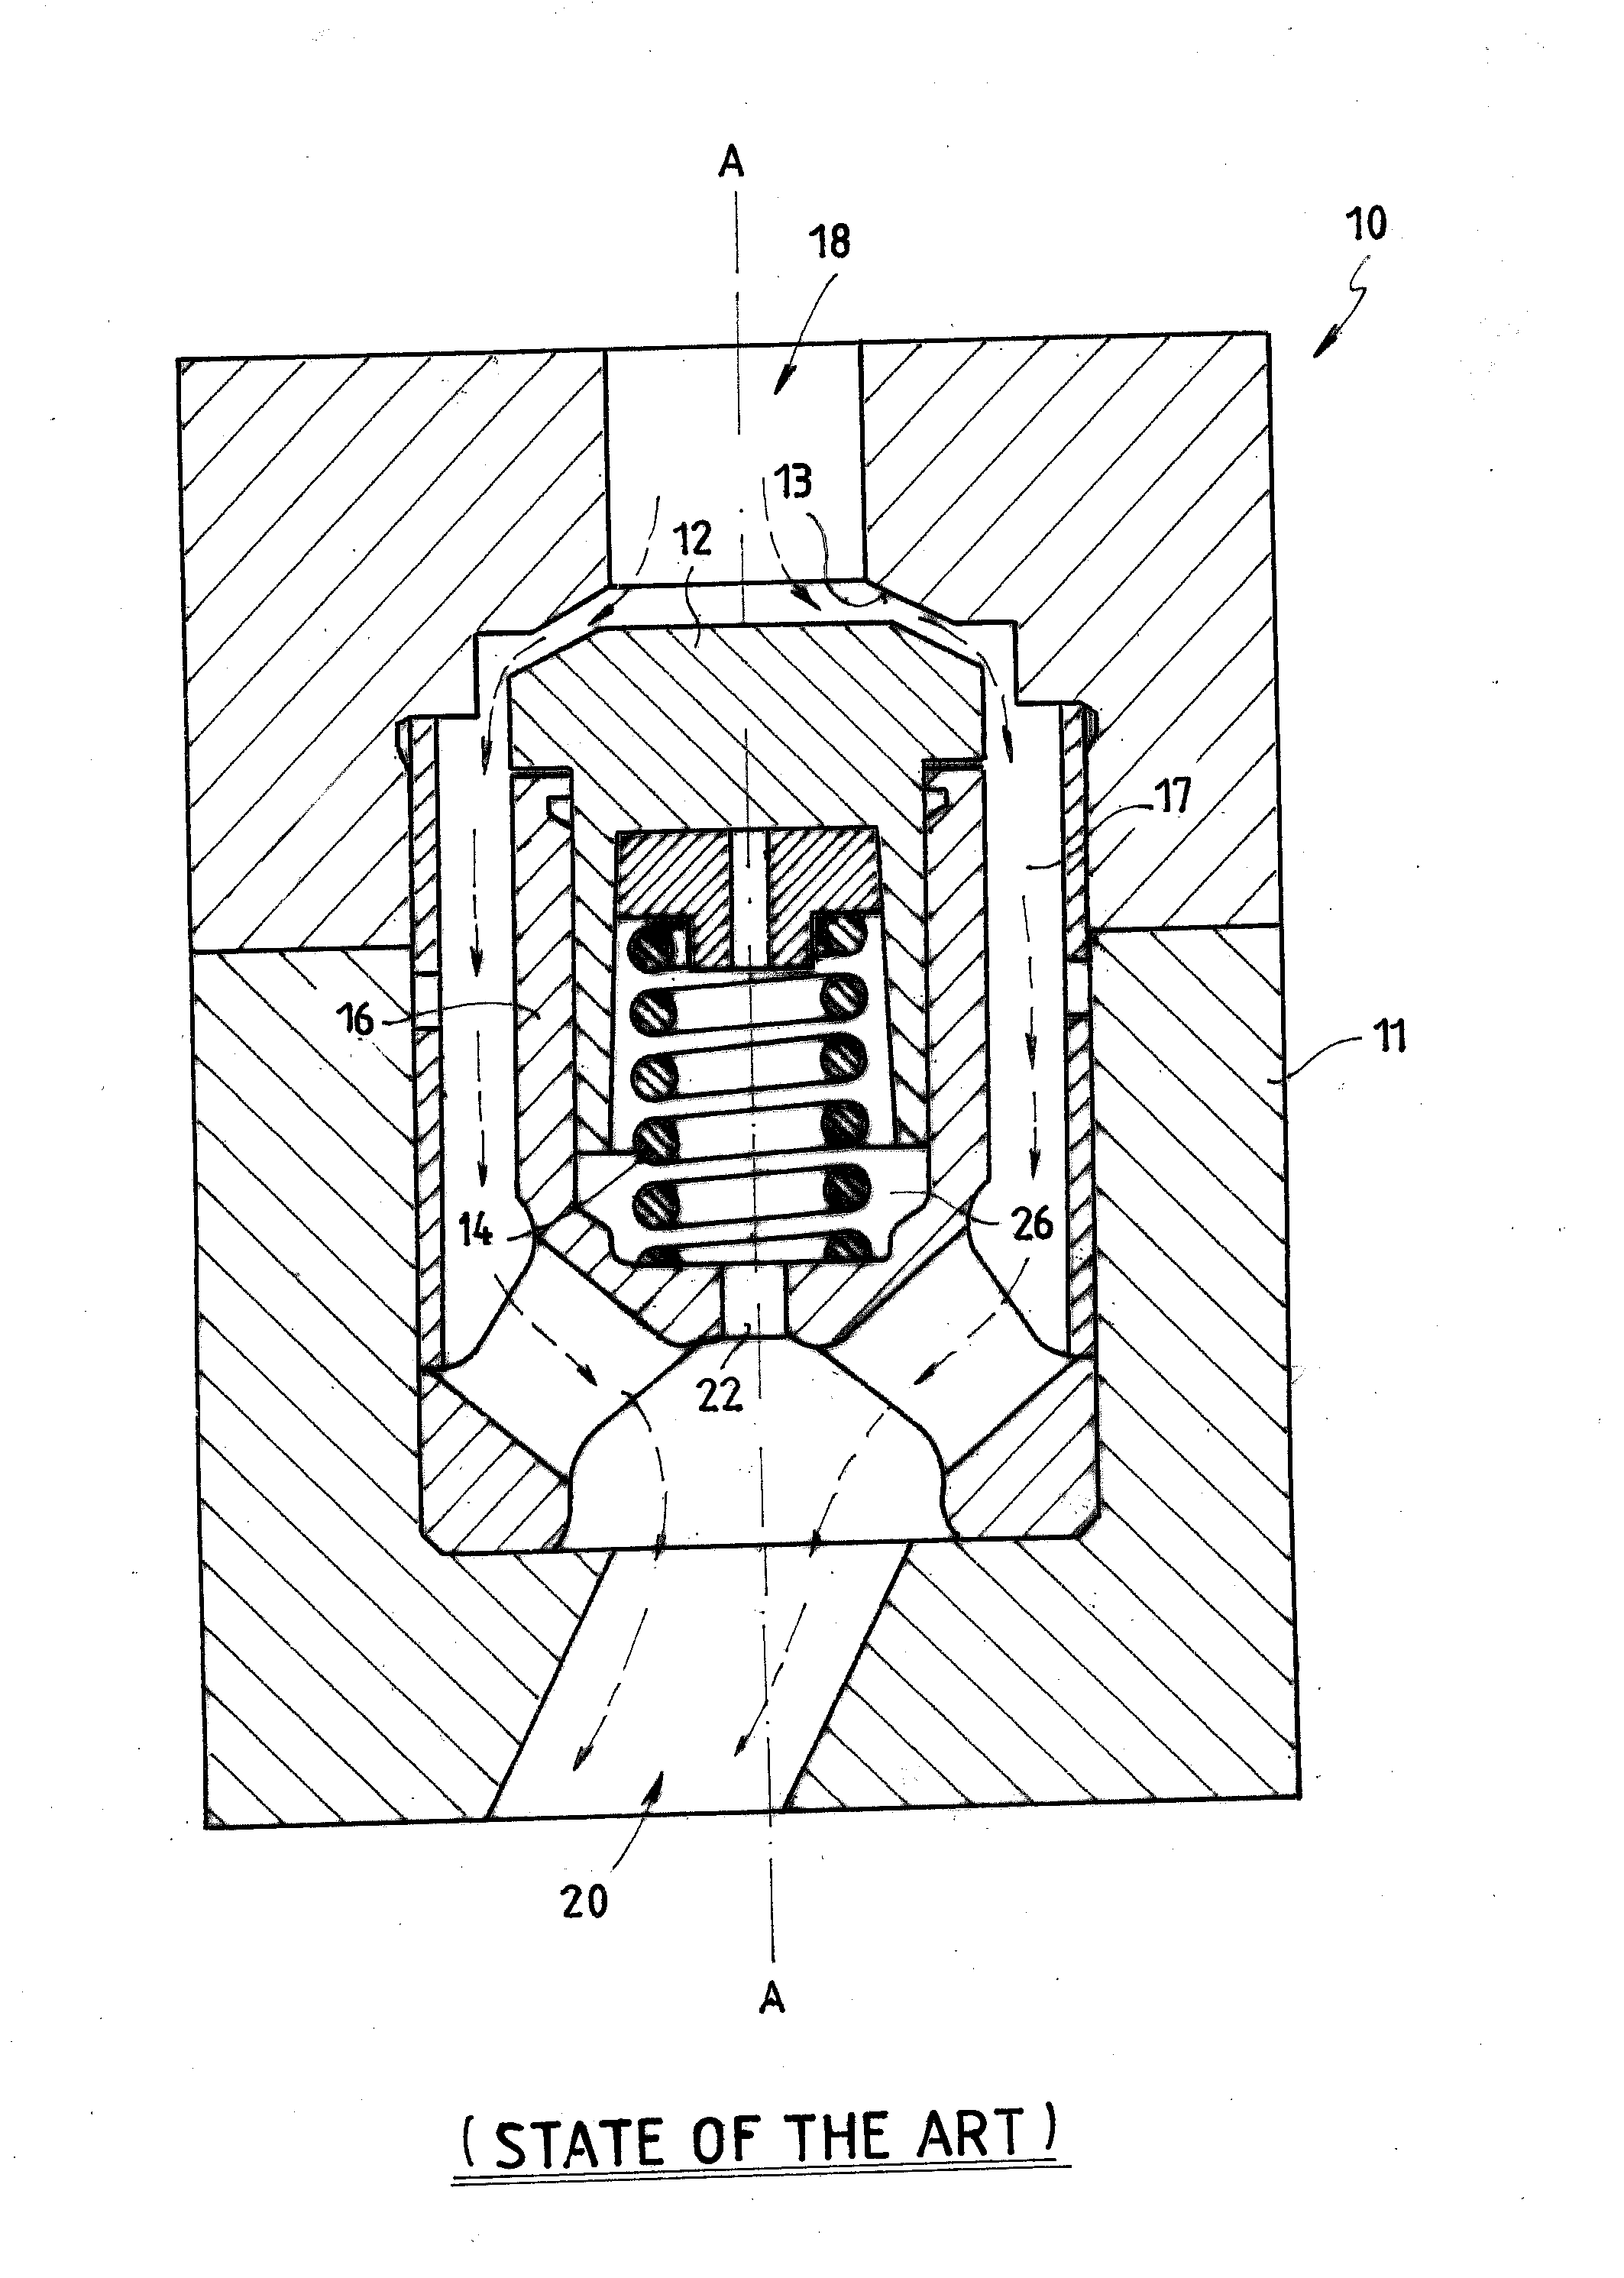 Poppet valve with an impact damper and method for reducing impact wear in hyper compressors